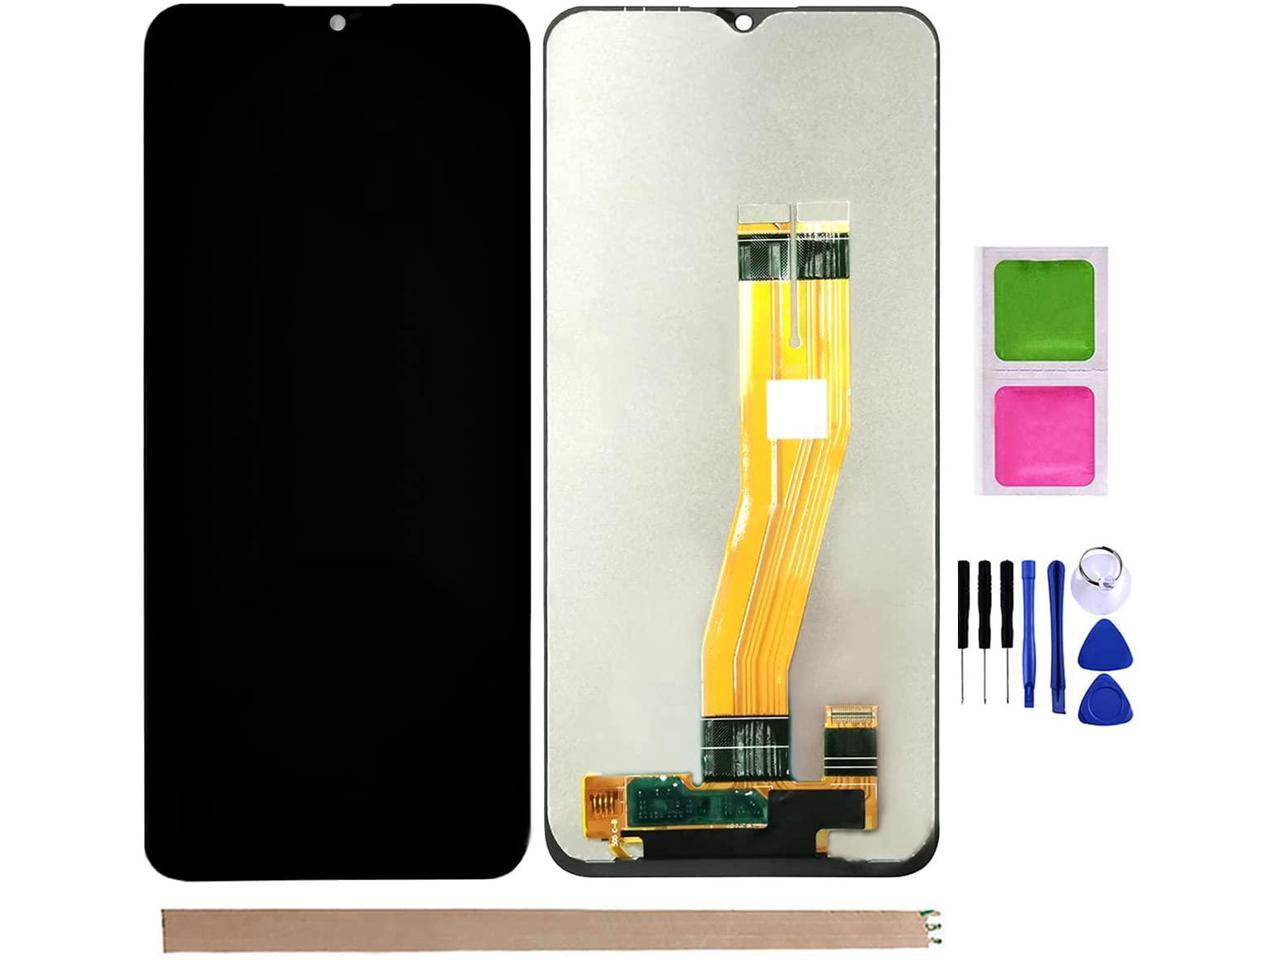 Galaxy A02s Lcd Screen Replacement For Samsung Galaxy A02s Sm A025u A025g A025a A025v S025dl 21 6 5 Lcd Display Touch Digitizer Replace A02s Usa Screen With Repair Part Tools A02s Lcd Screen Newegg Com